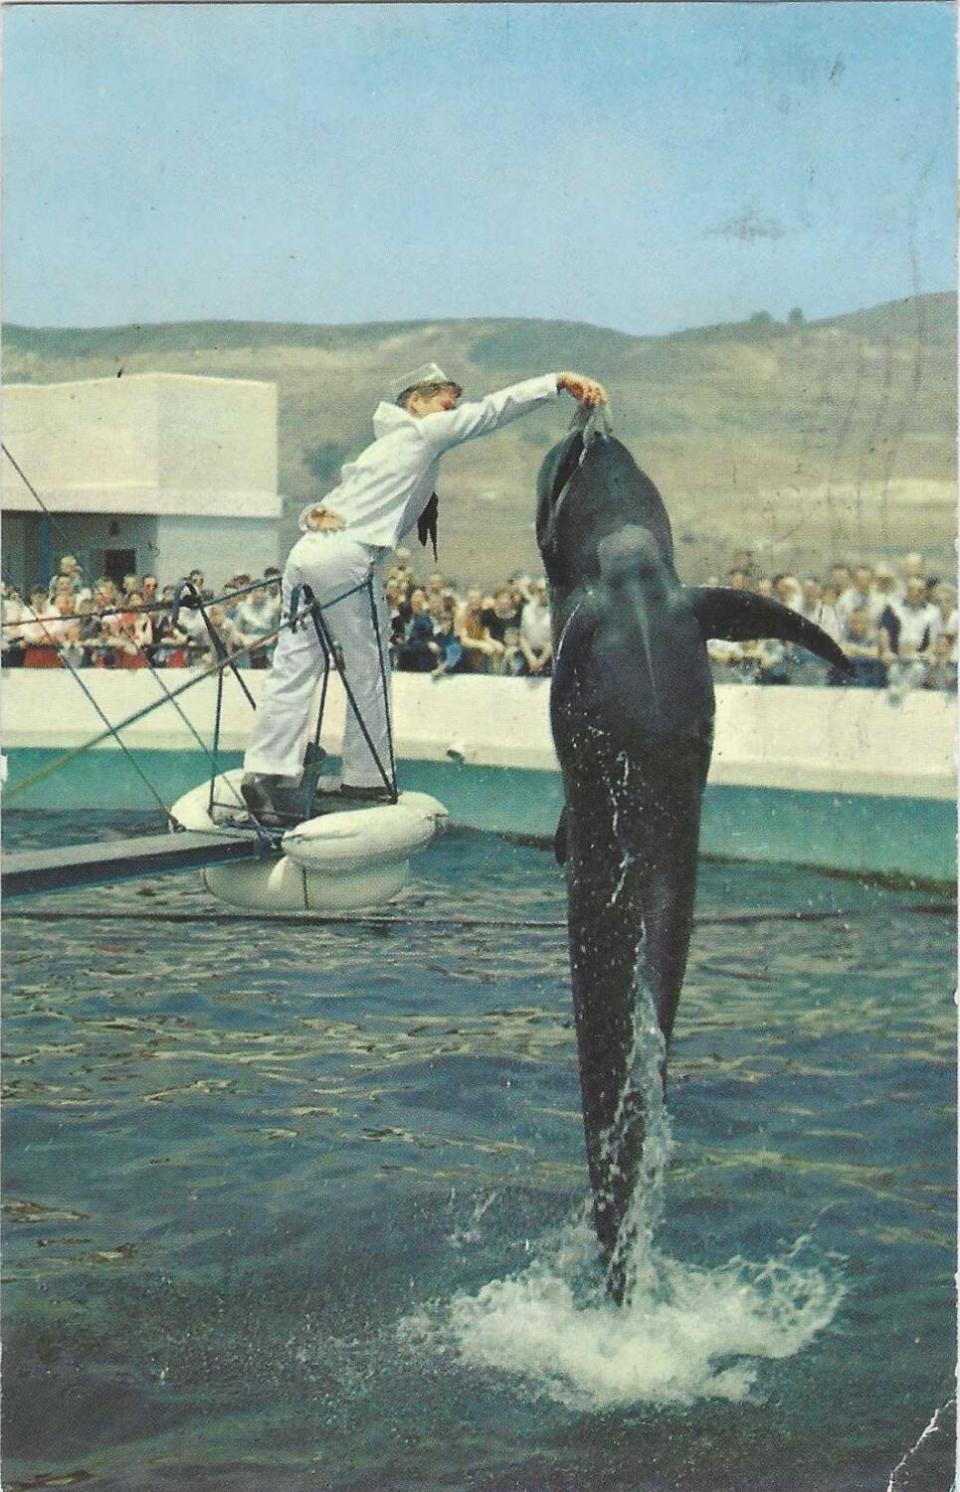 A man in a sailor outfit holds out food for a whale leaping from a tank